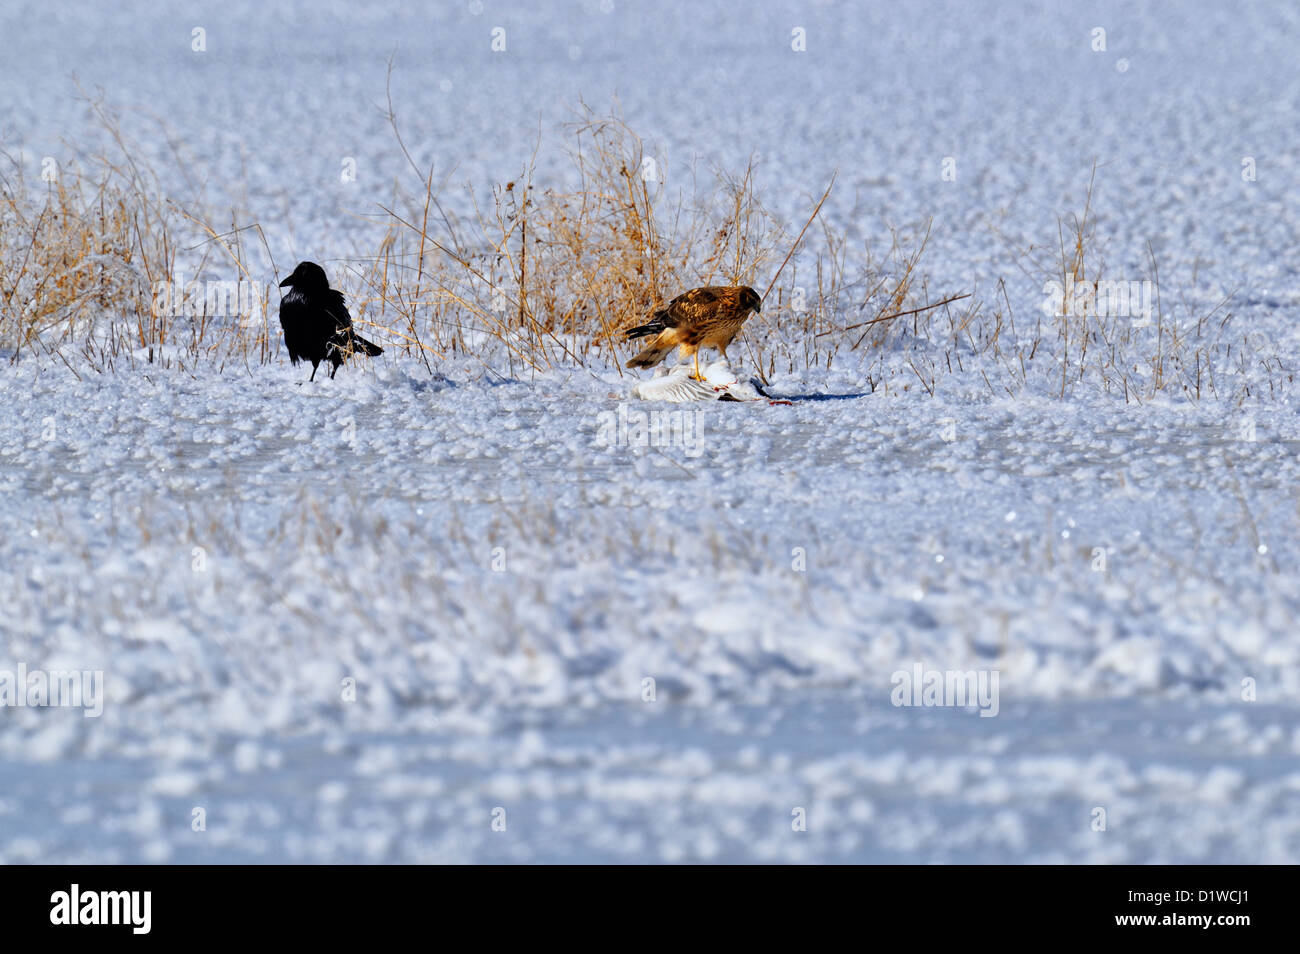 Northern harrier  (Circus cyaneus) Feeding on goose carcass with raven harassment, Bosque del Apache National Wildlife Refuge, New Mexico, USA Stock Photo